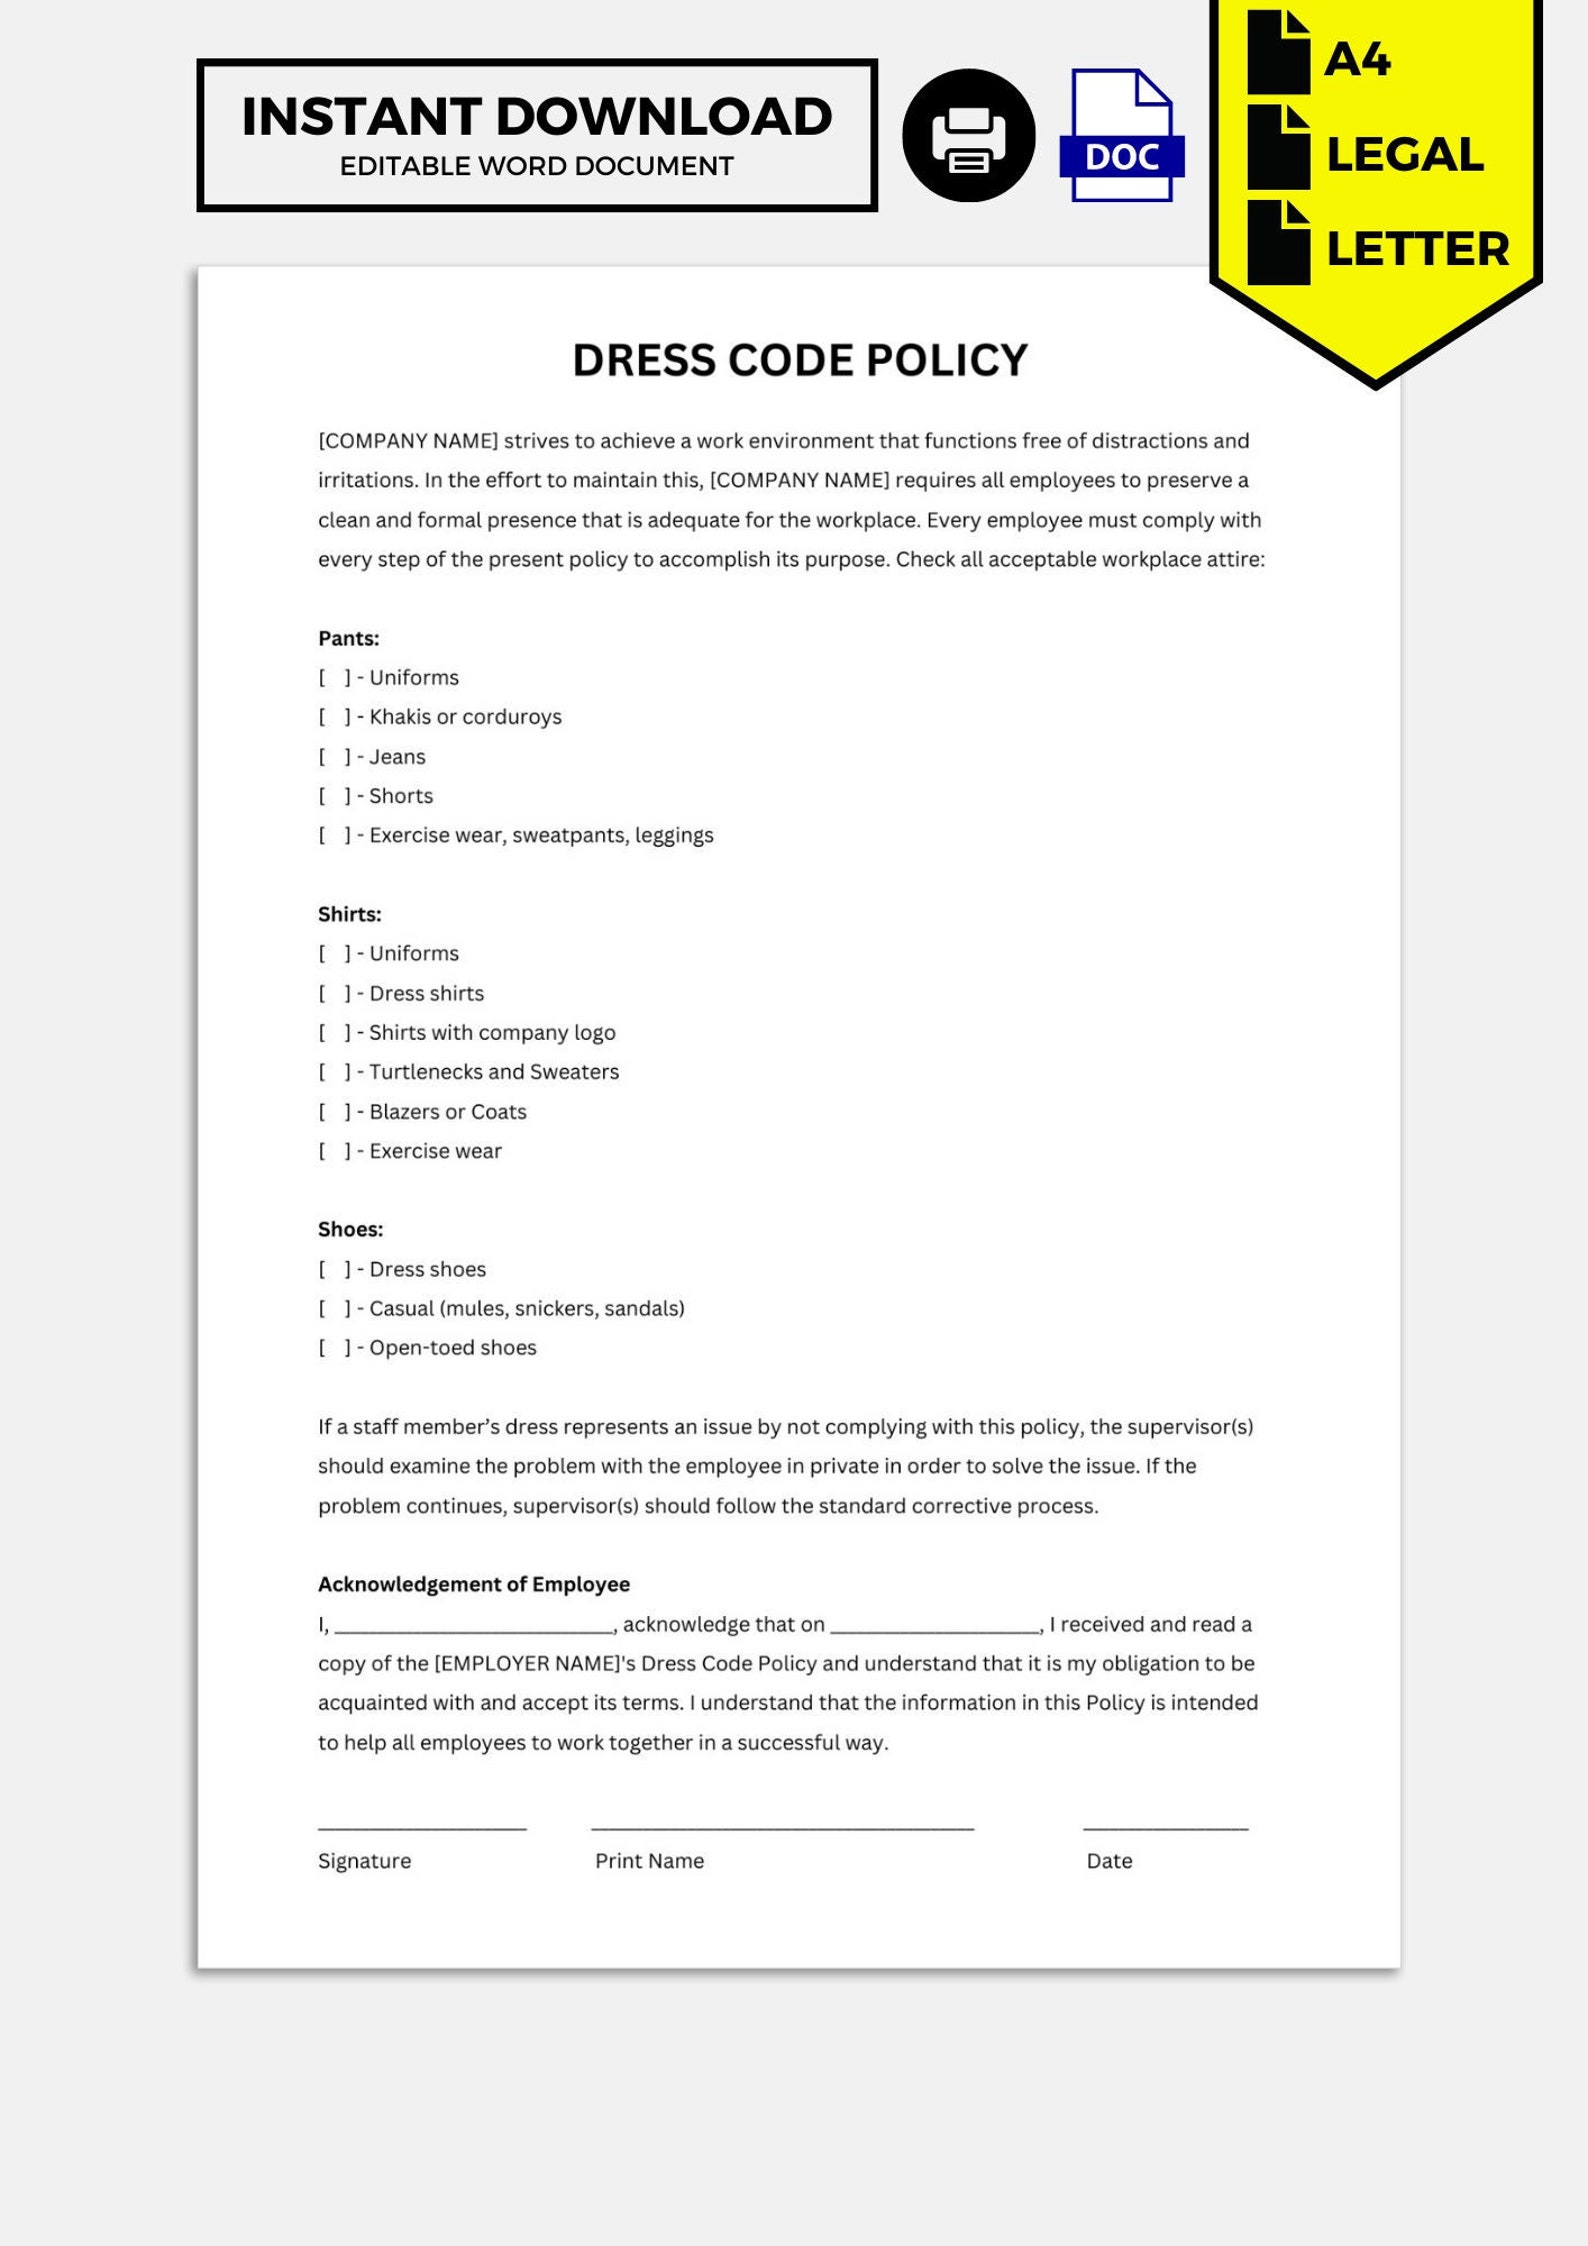 Dress Code Policy Dress Code Policy Template - Etsy